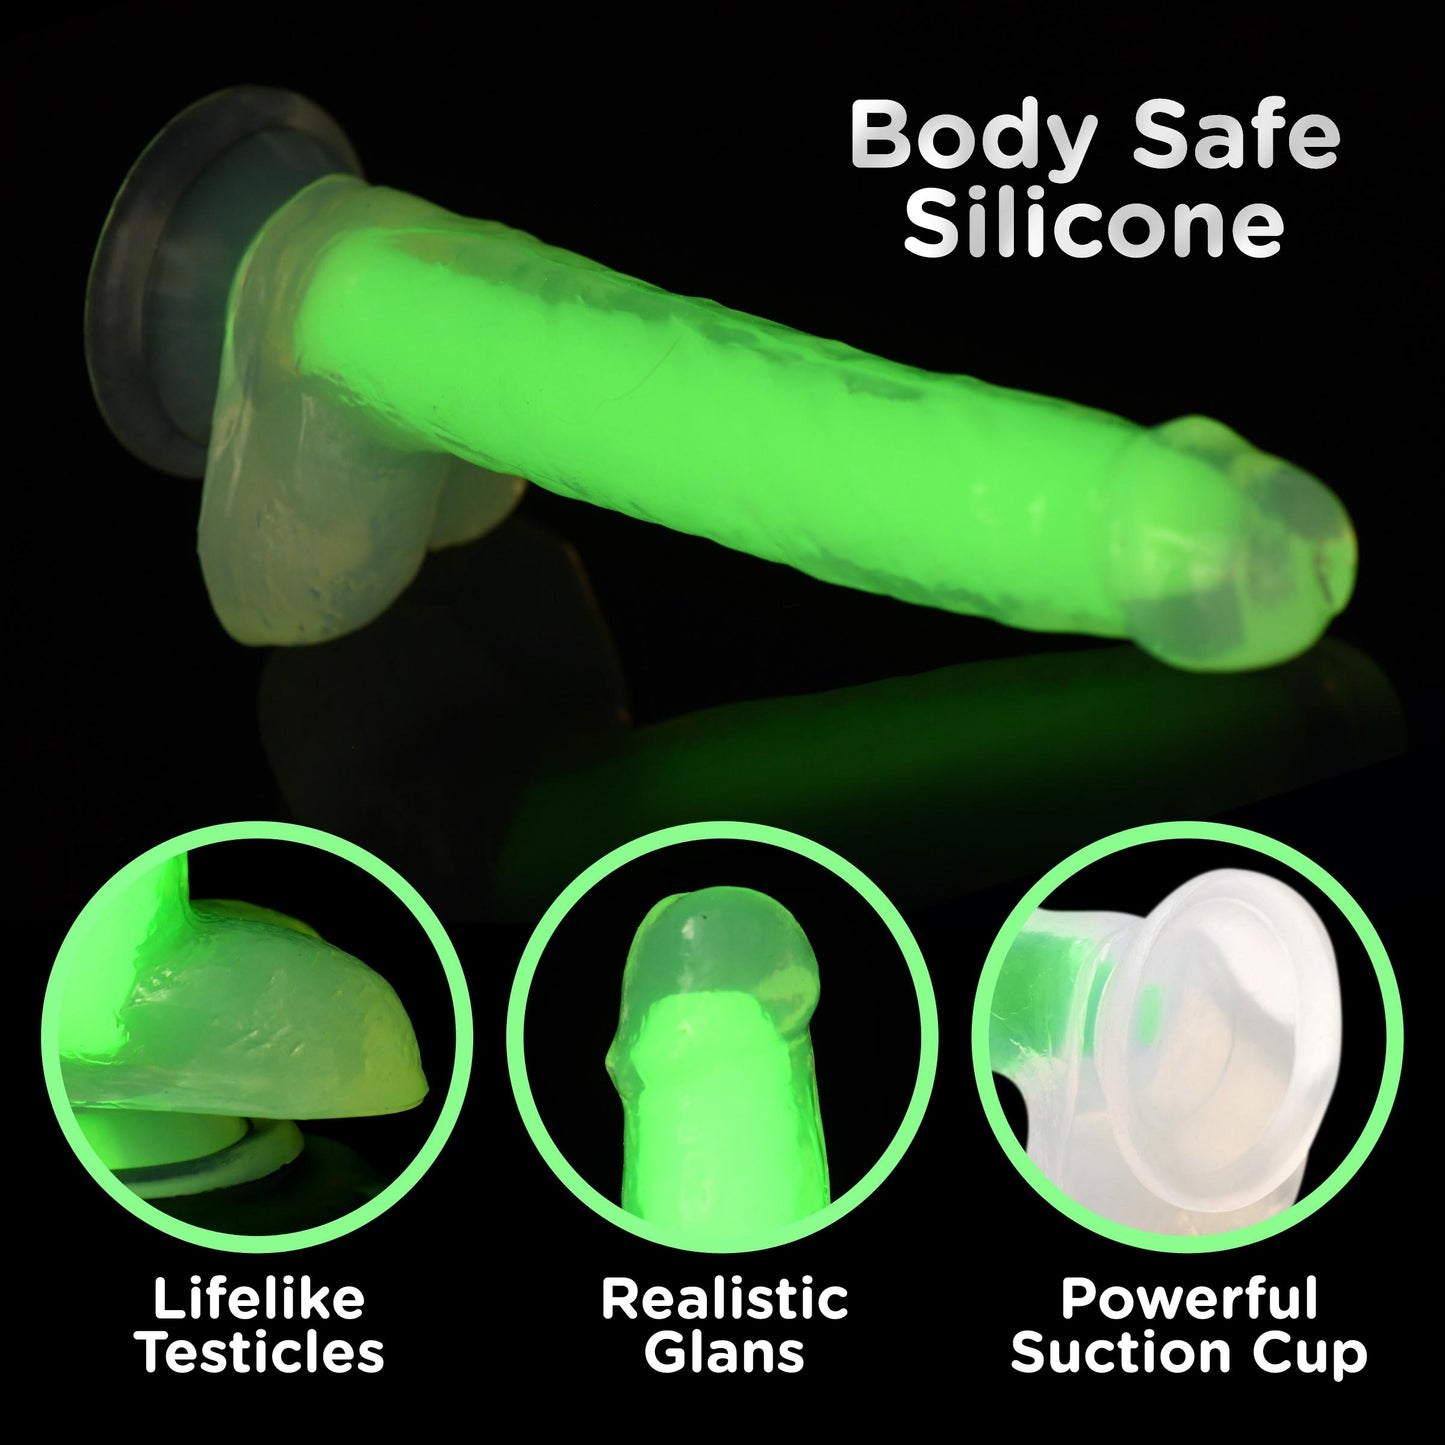 7 Inch Glow-in-the-dark Silicone Dildo With Balls - Green